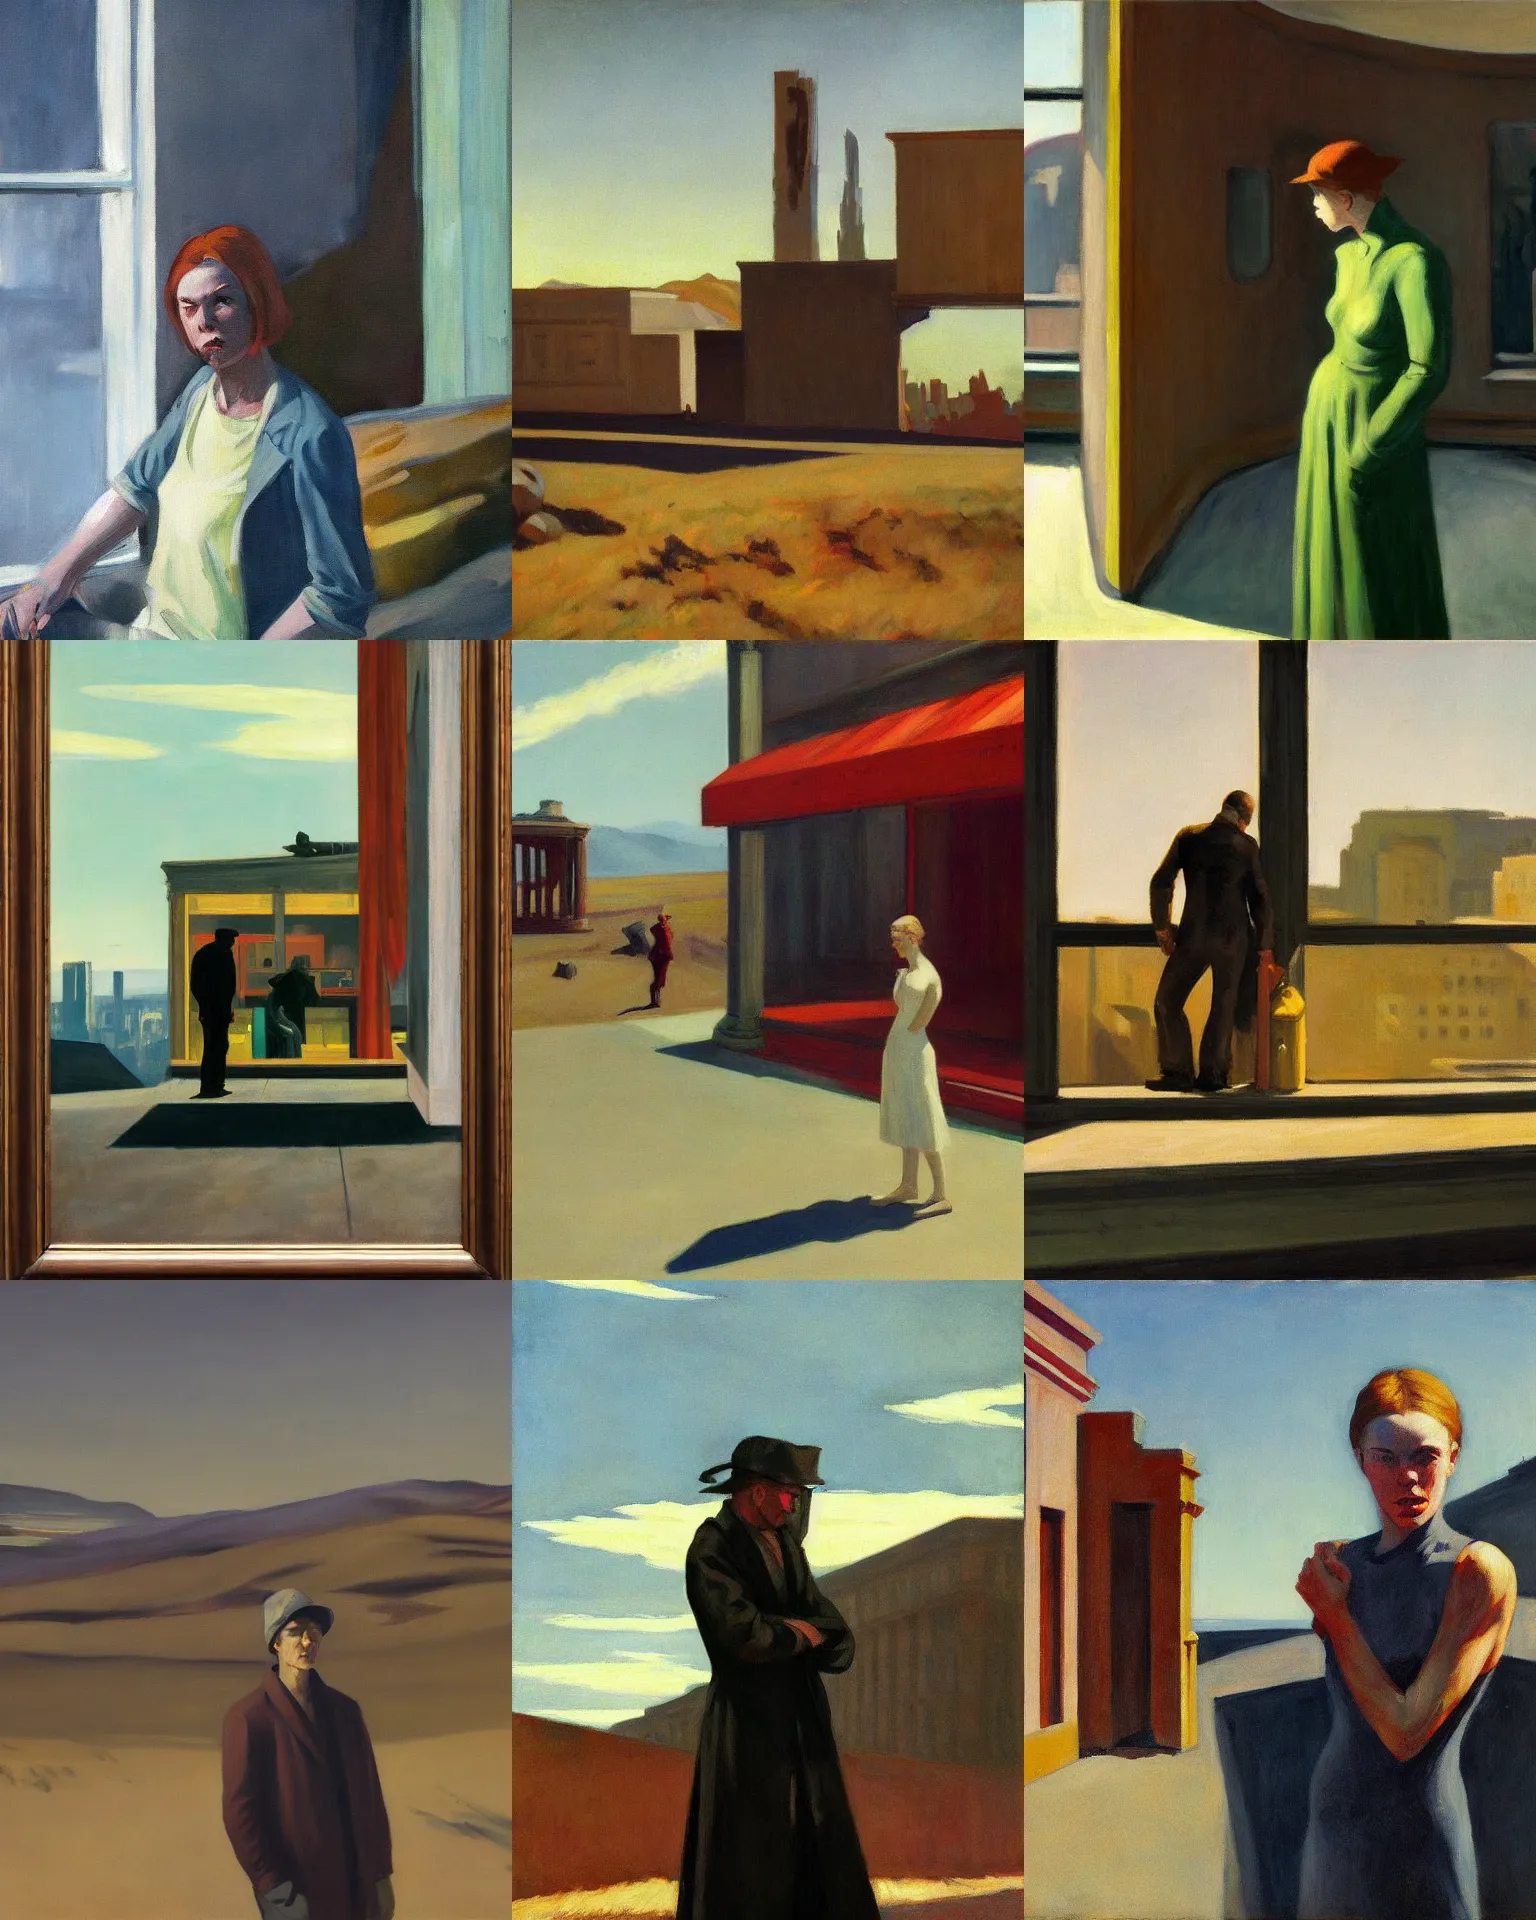 Prompt: A post-apocalyptic portrait painted by Edward Hopper